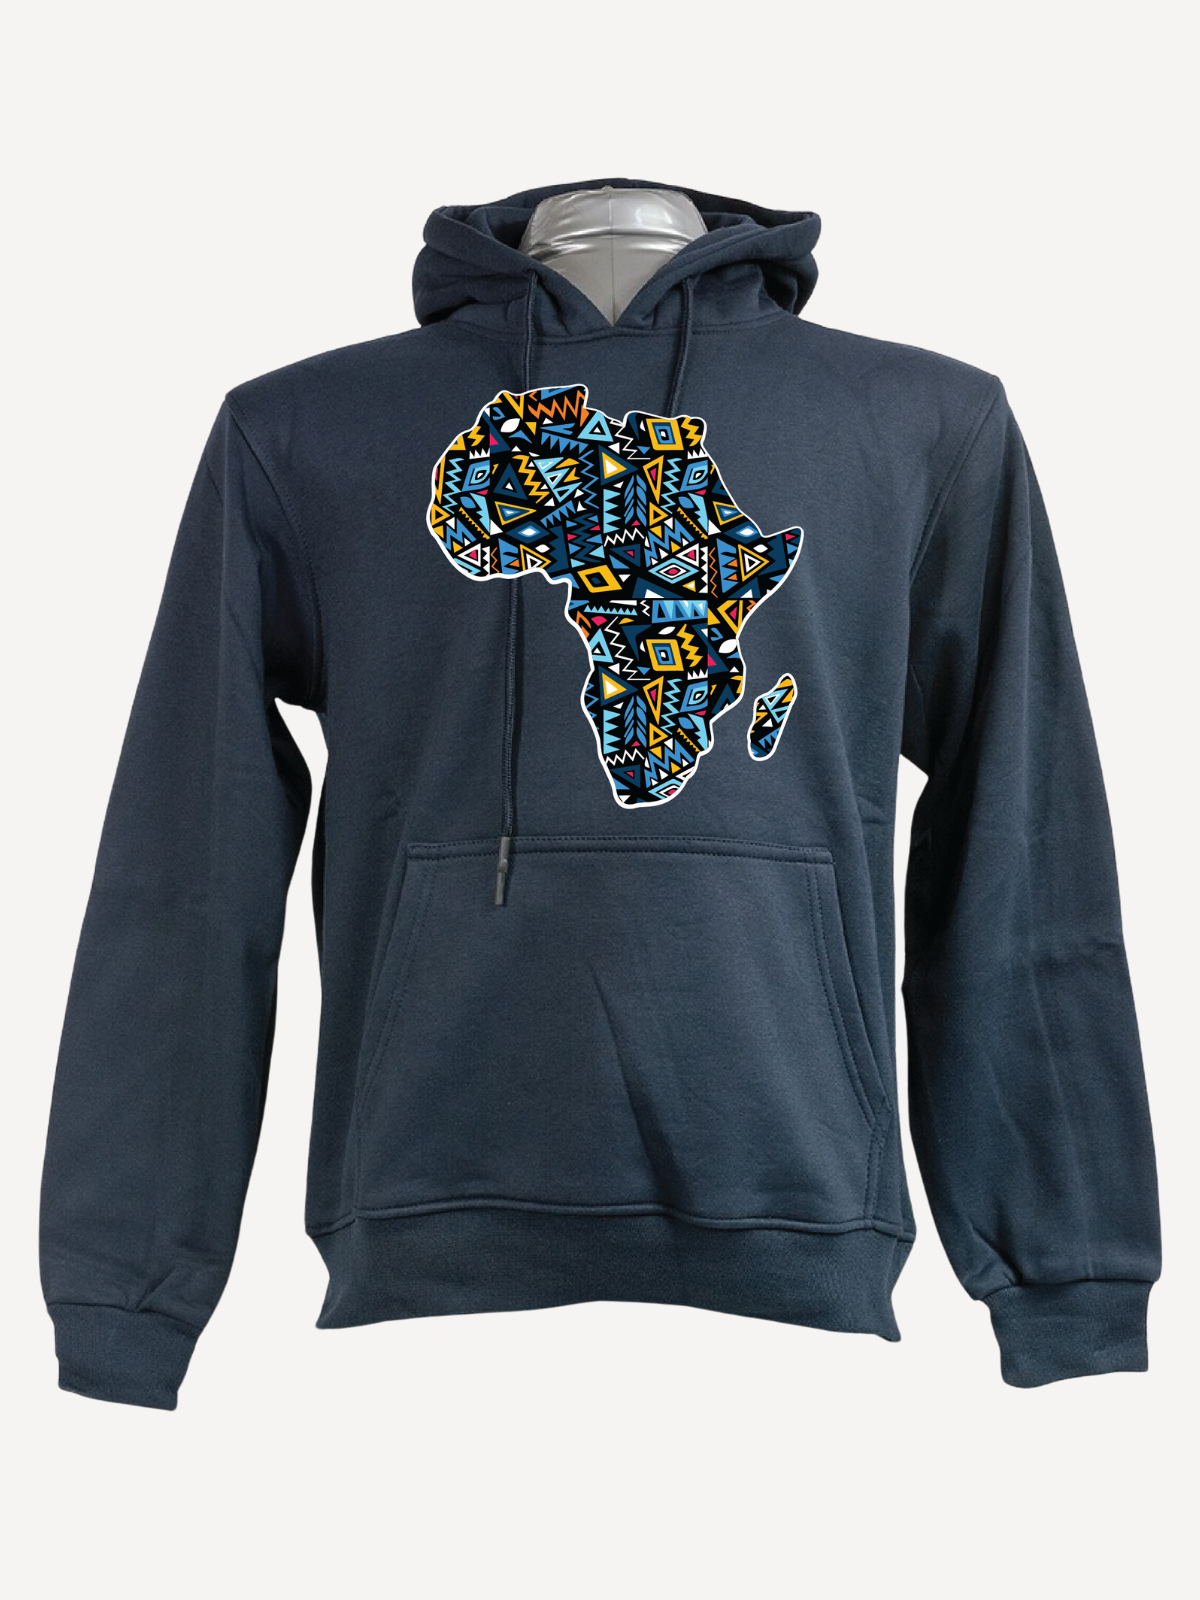 Kali Graphic Hoodies: Navy with Africa Map